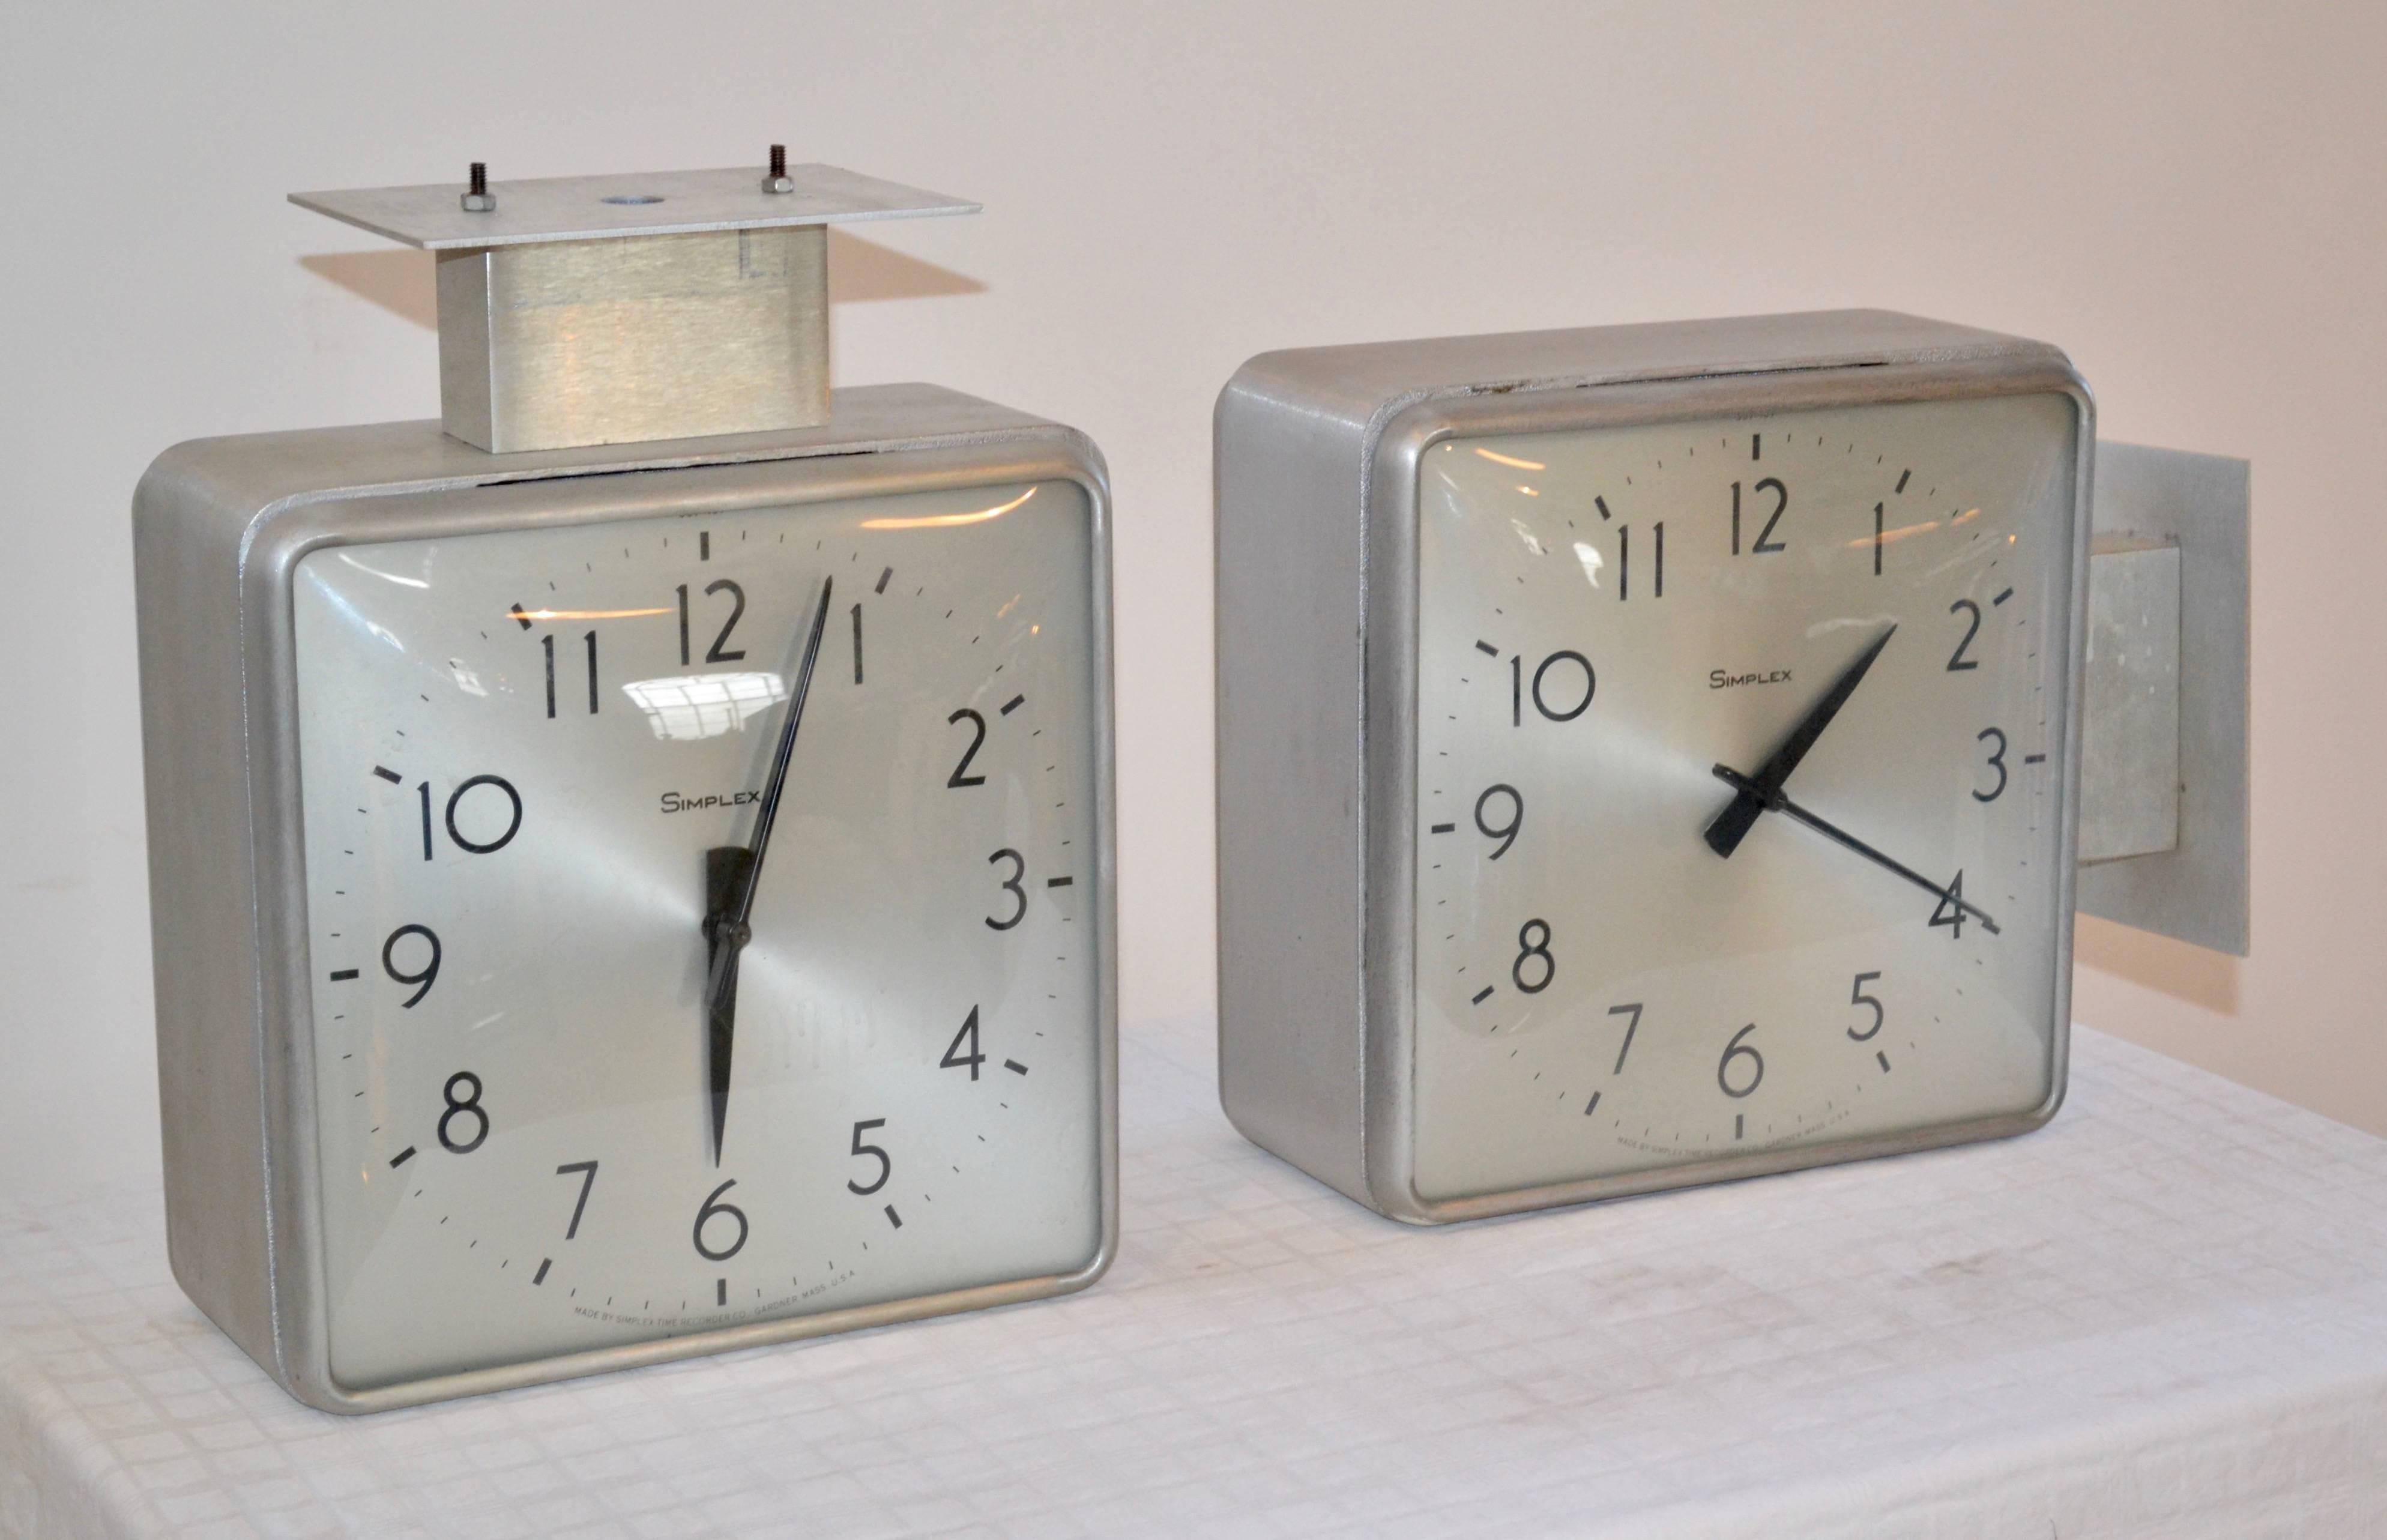 These Simplex double-sided clocks have cast aluminium housings. Clips are present that allow for different mounting configurations. They can also be completely detached from the housing if hanging straight on the wall is preferred. Time adjustments